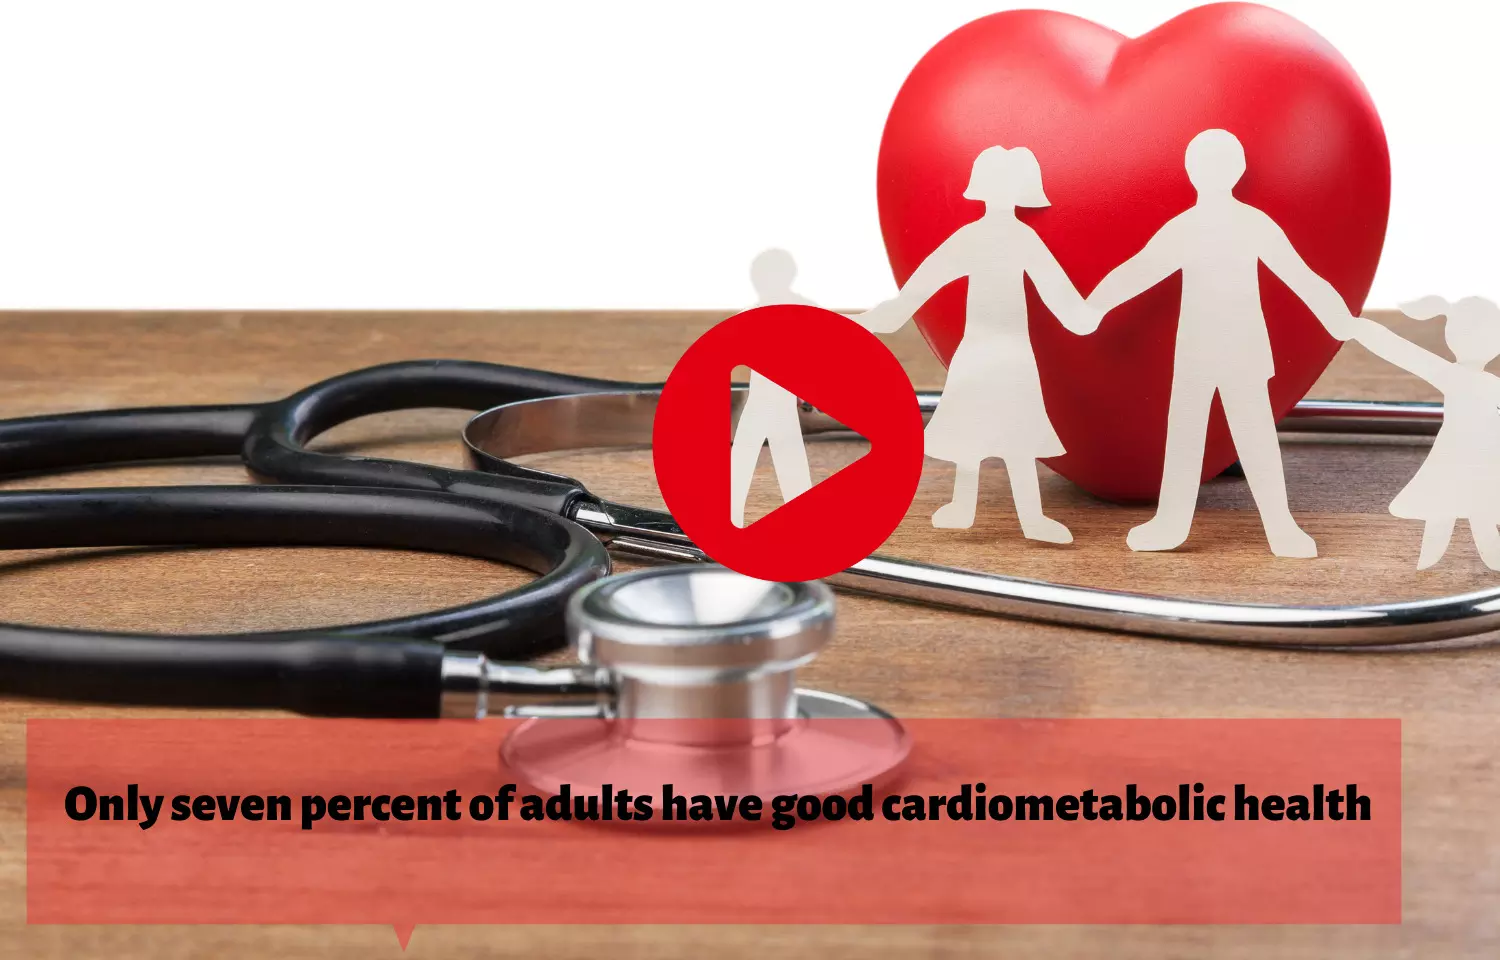 Only seven percent of adults have good cardiometabolic health